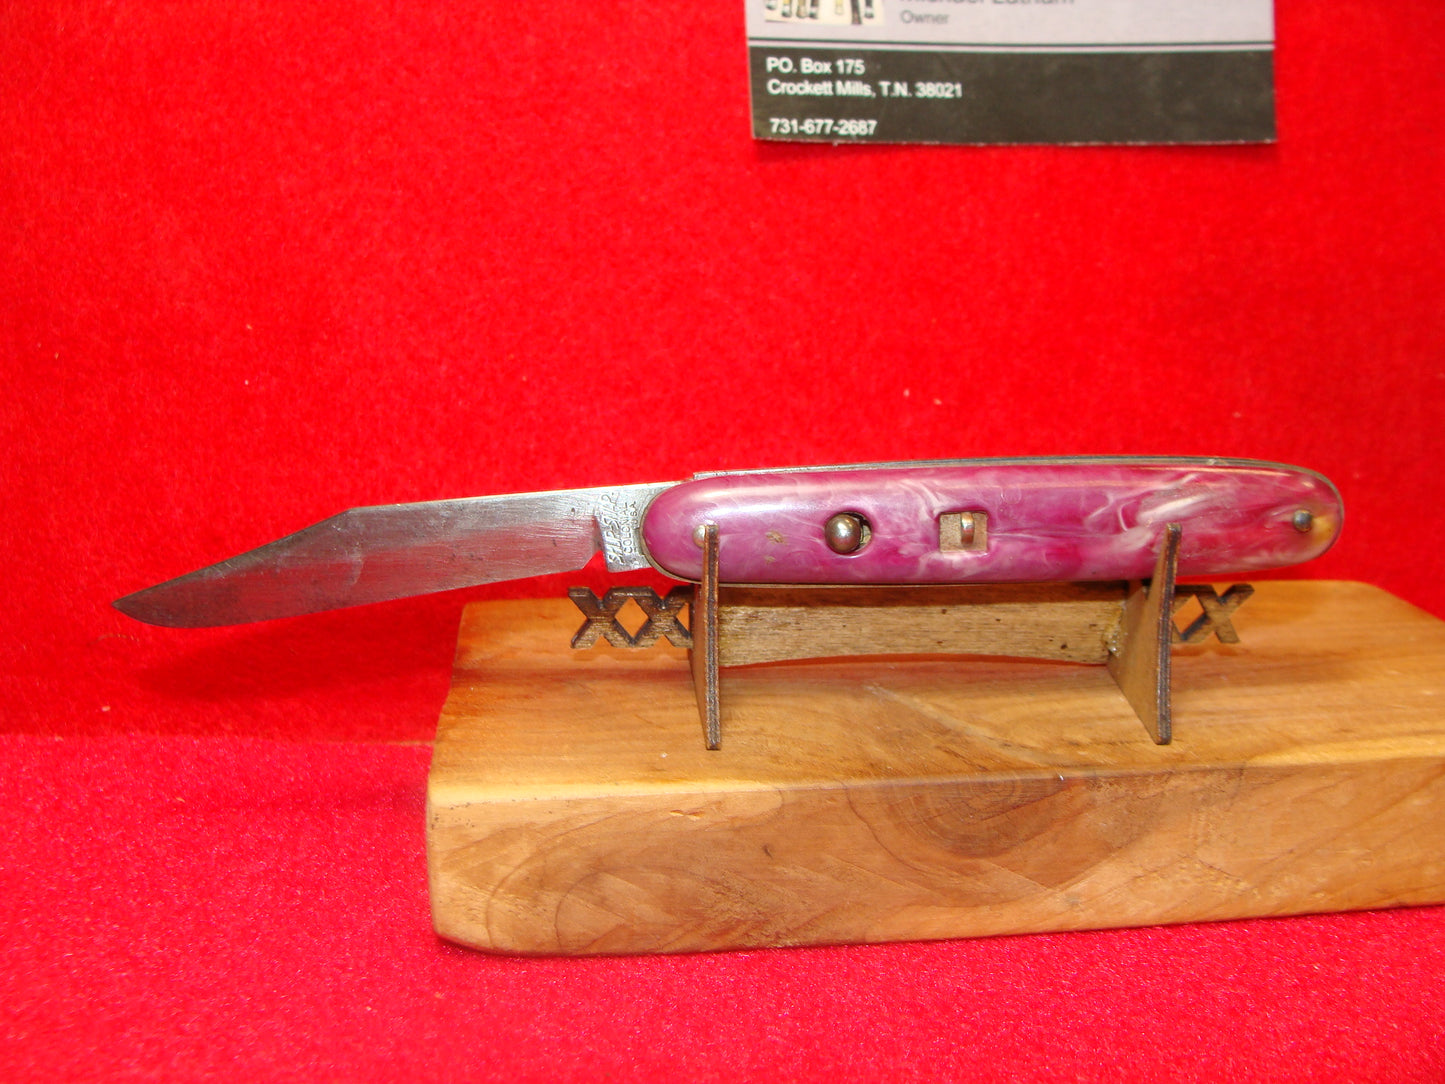 Sold at Auction: VINTAGE SHUR SNAP COLONIAL SWITCHBLADE KNIFE